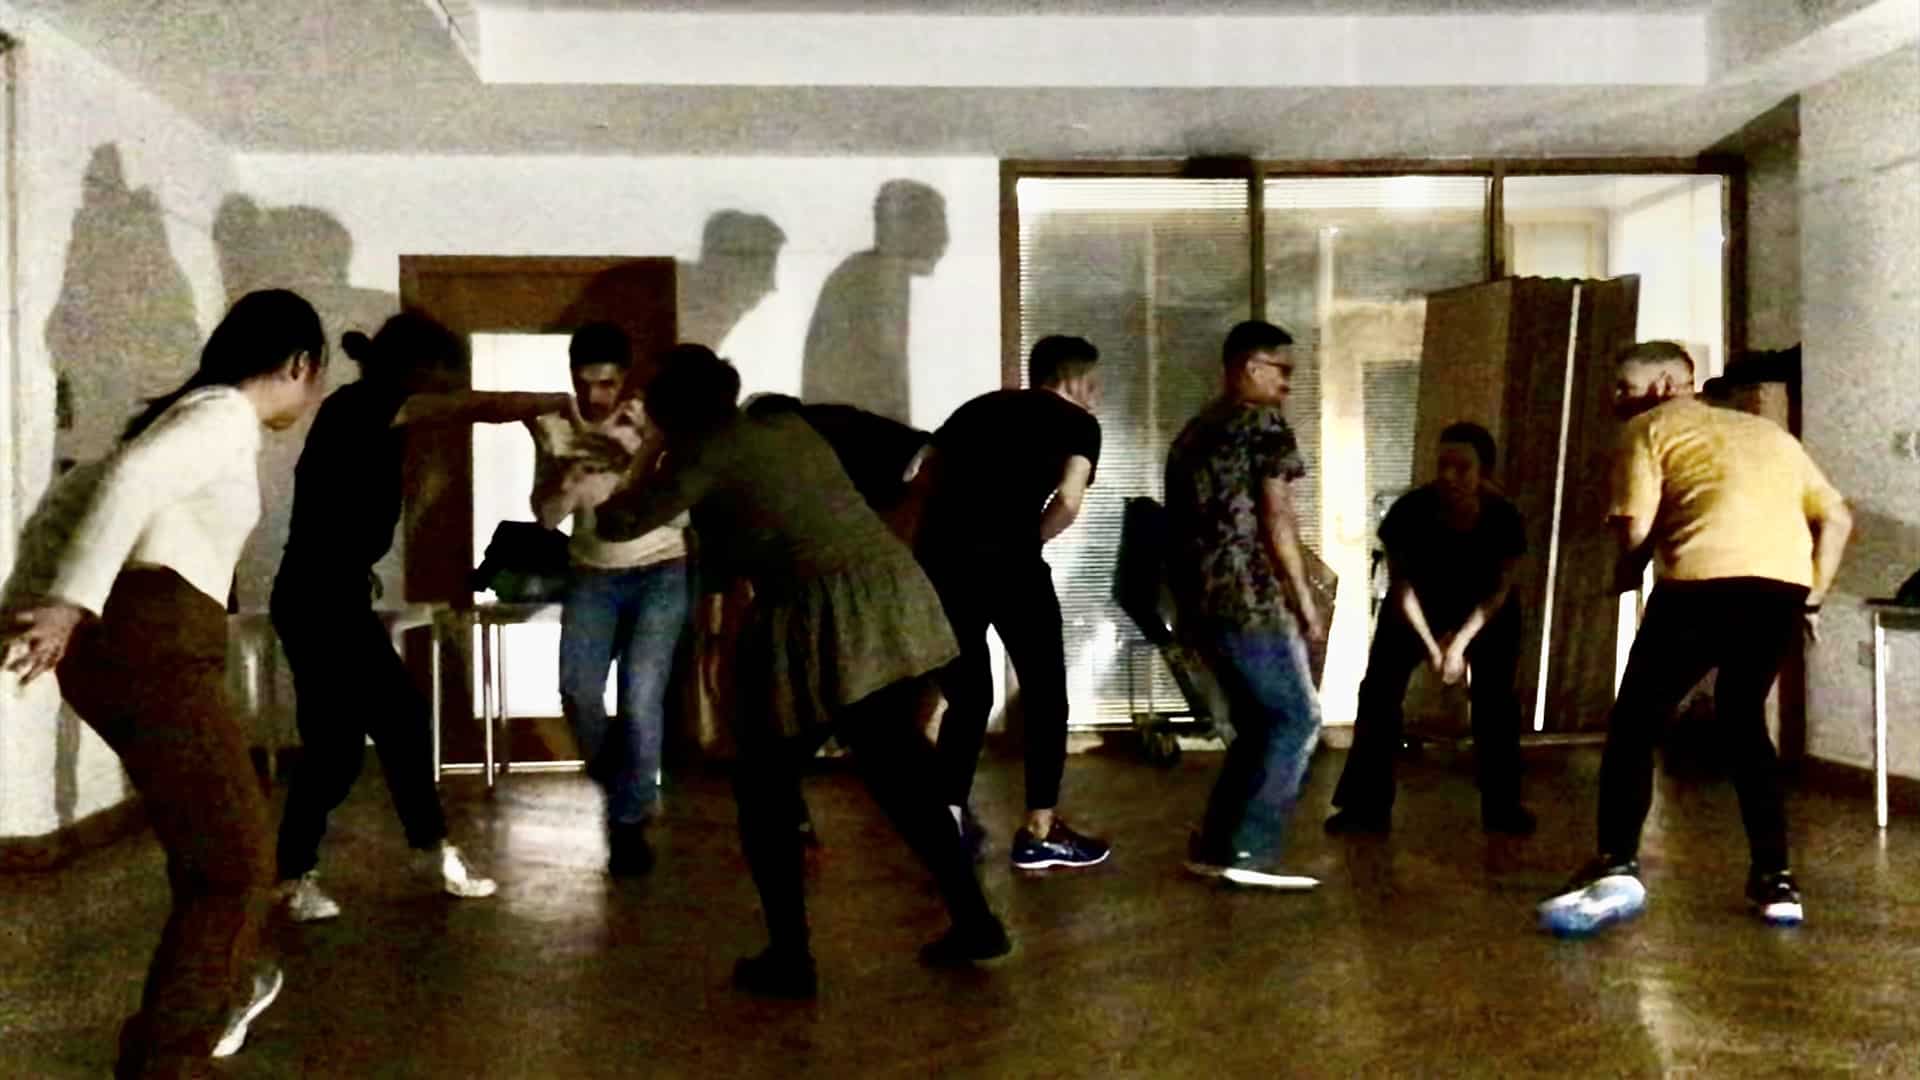 Eight performers move around a small rehearsal room. They seem to be caught in the act of sneaking about